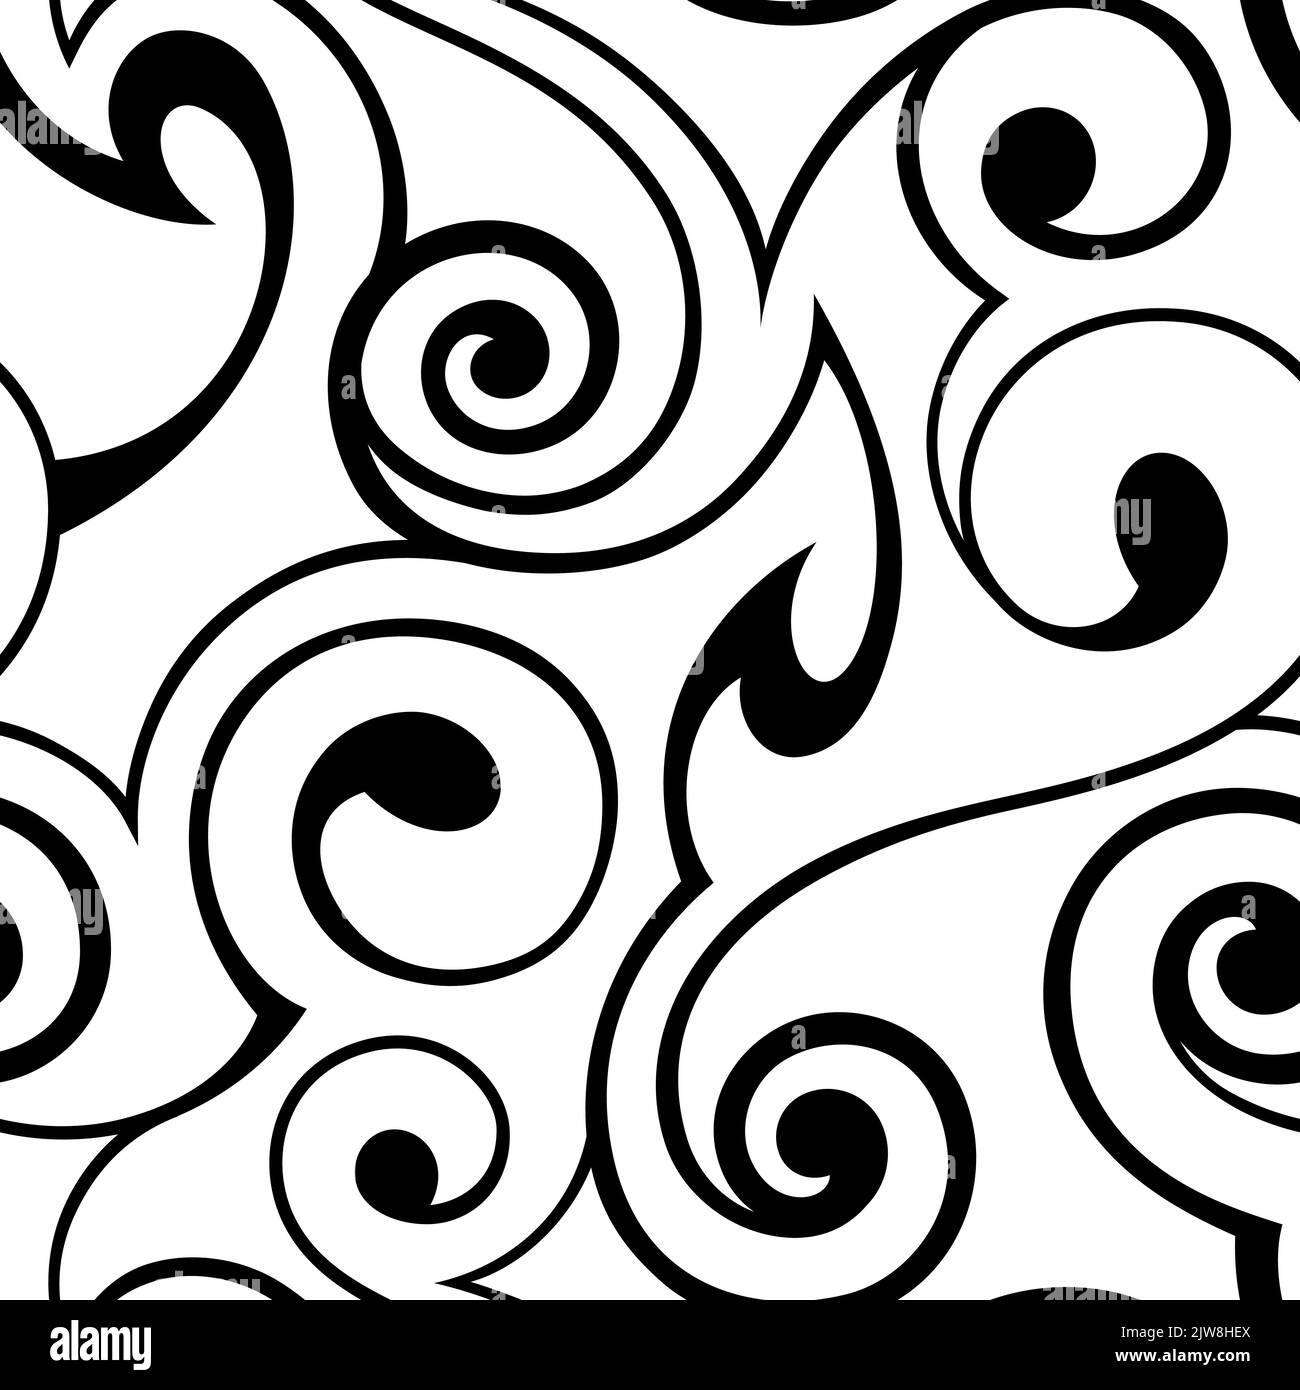 Abstract seamless vector black and white spiral and swirl pattern ...